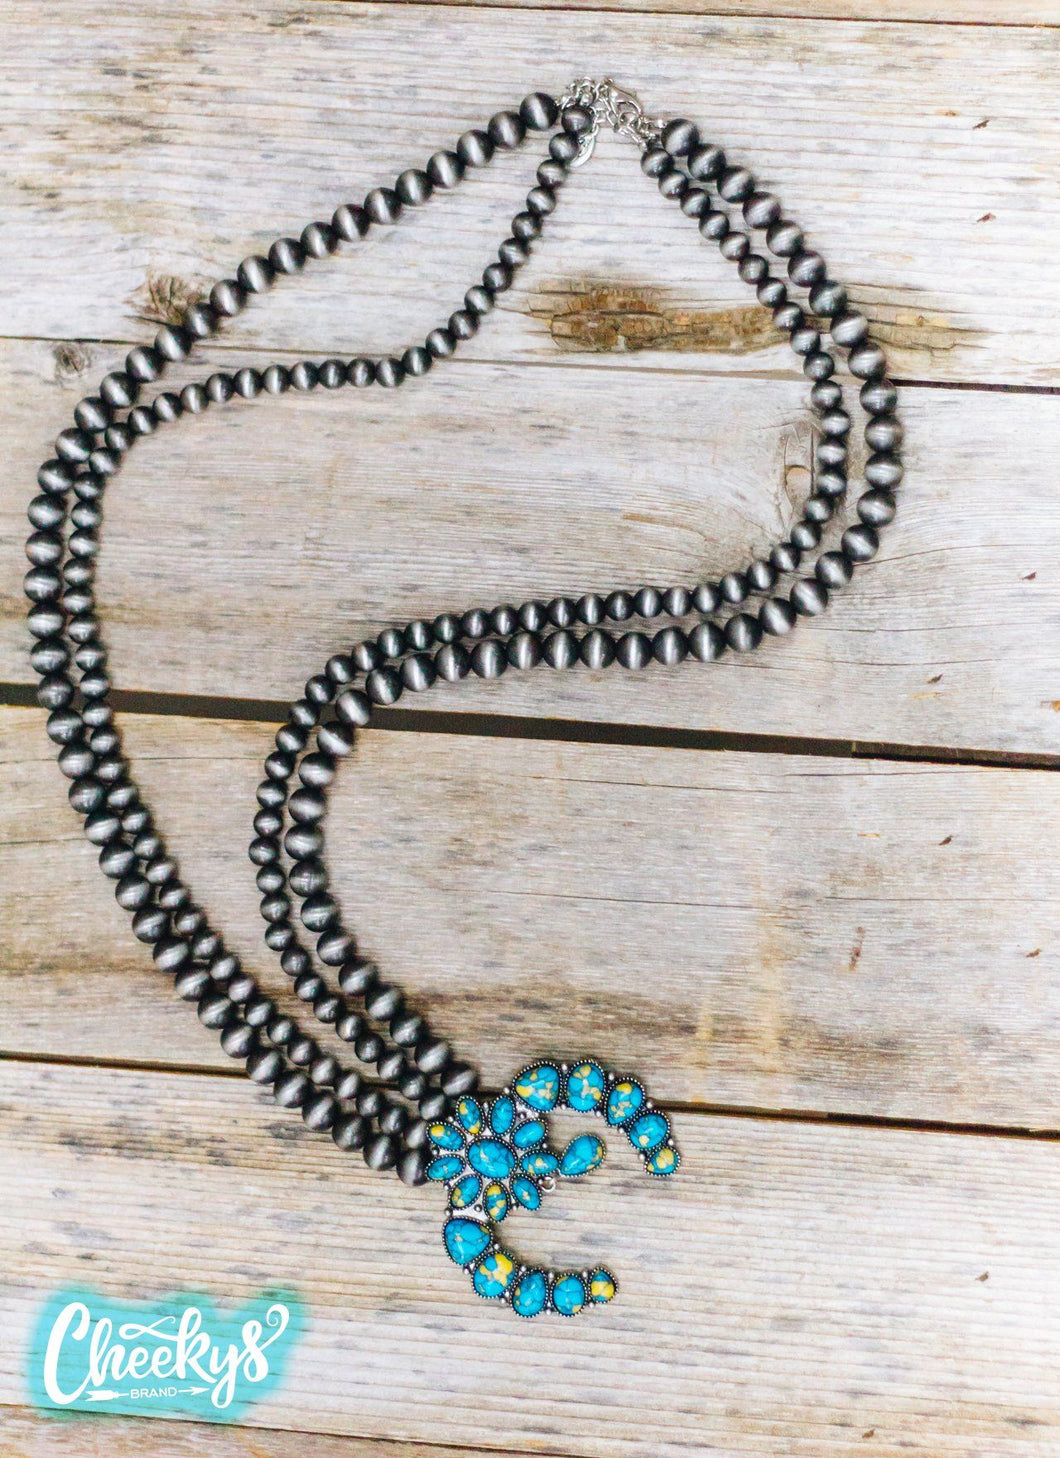 Roselynn Squash Blossom Necklace With Turquoise Stones and Navajo Pearls